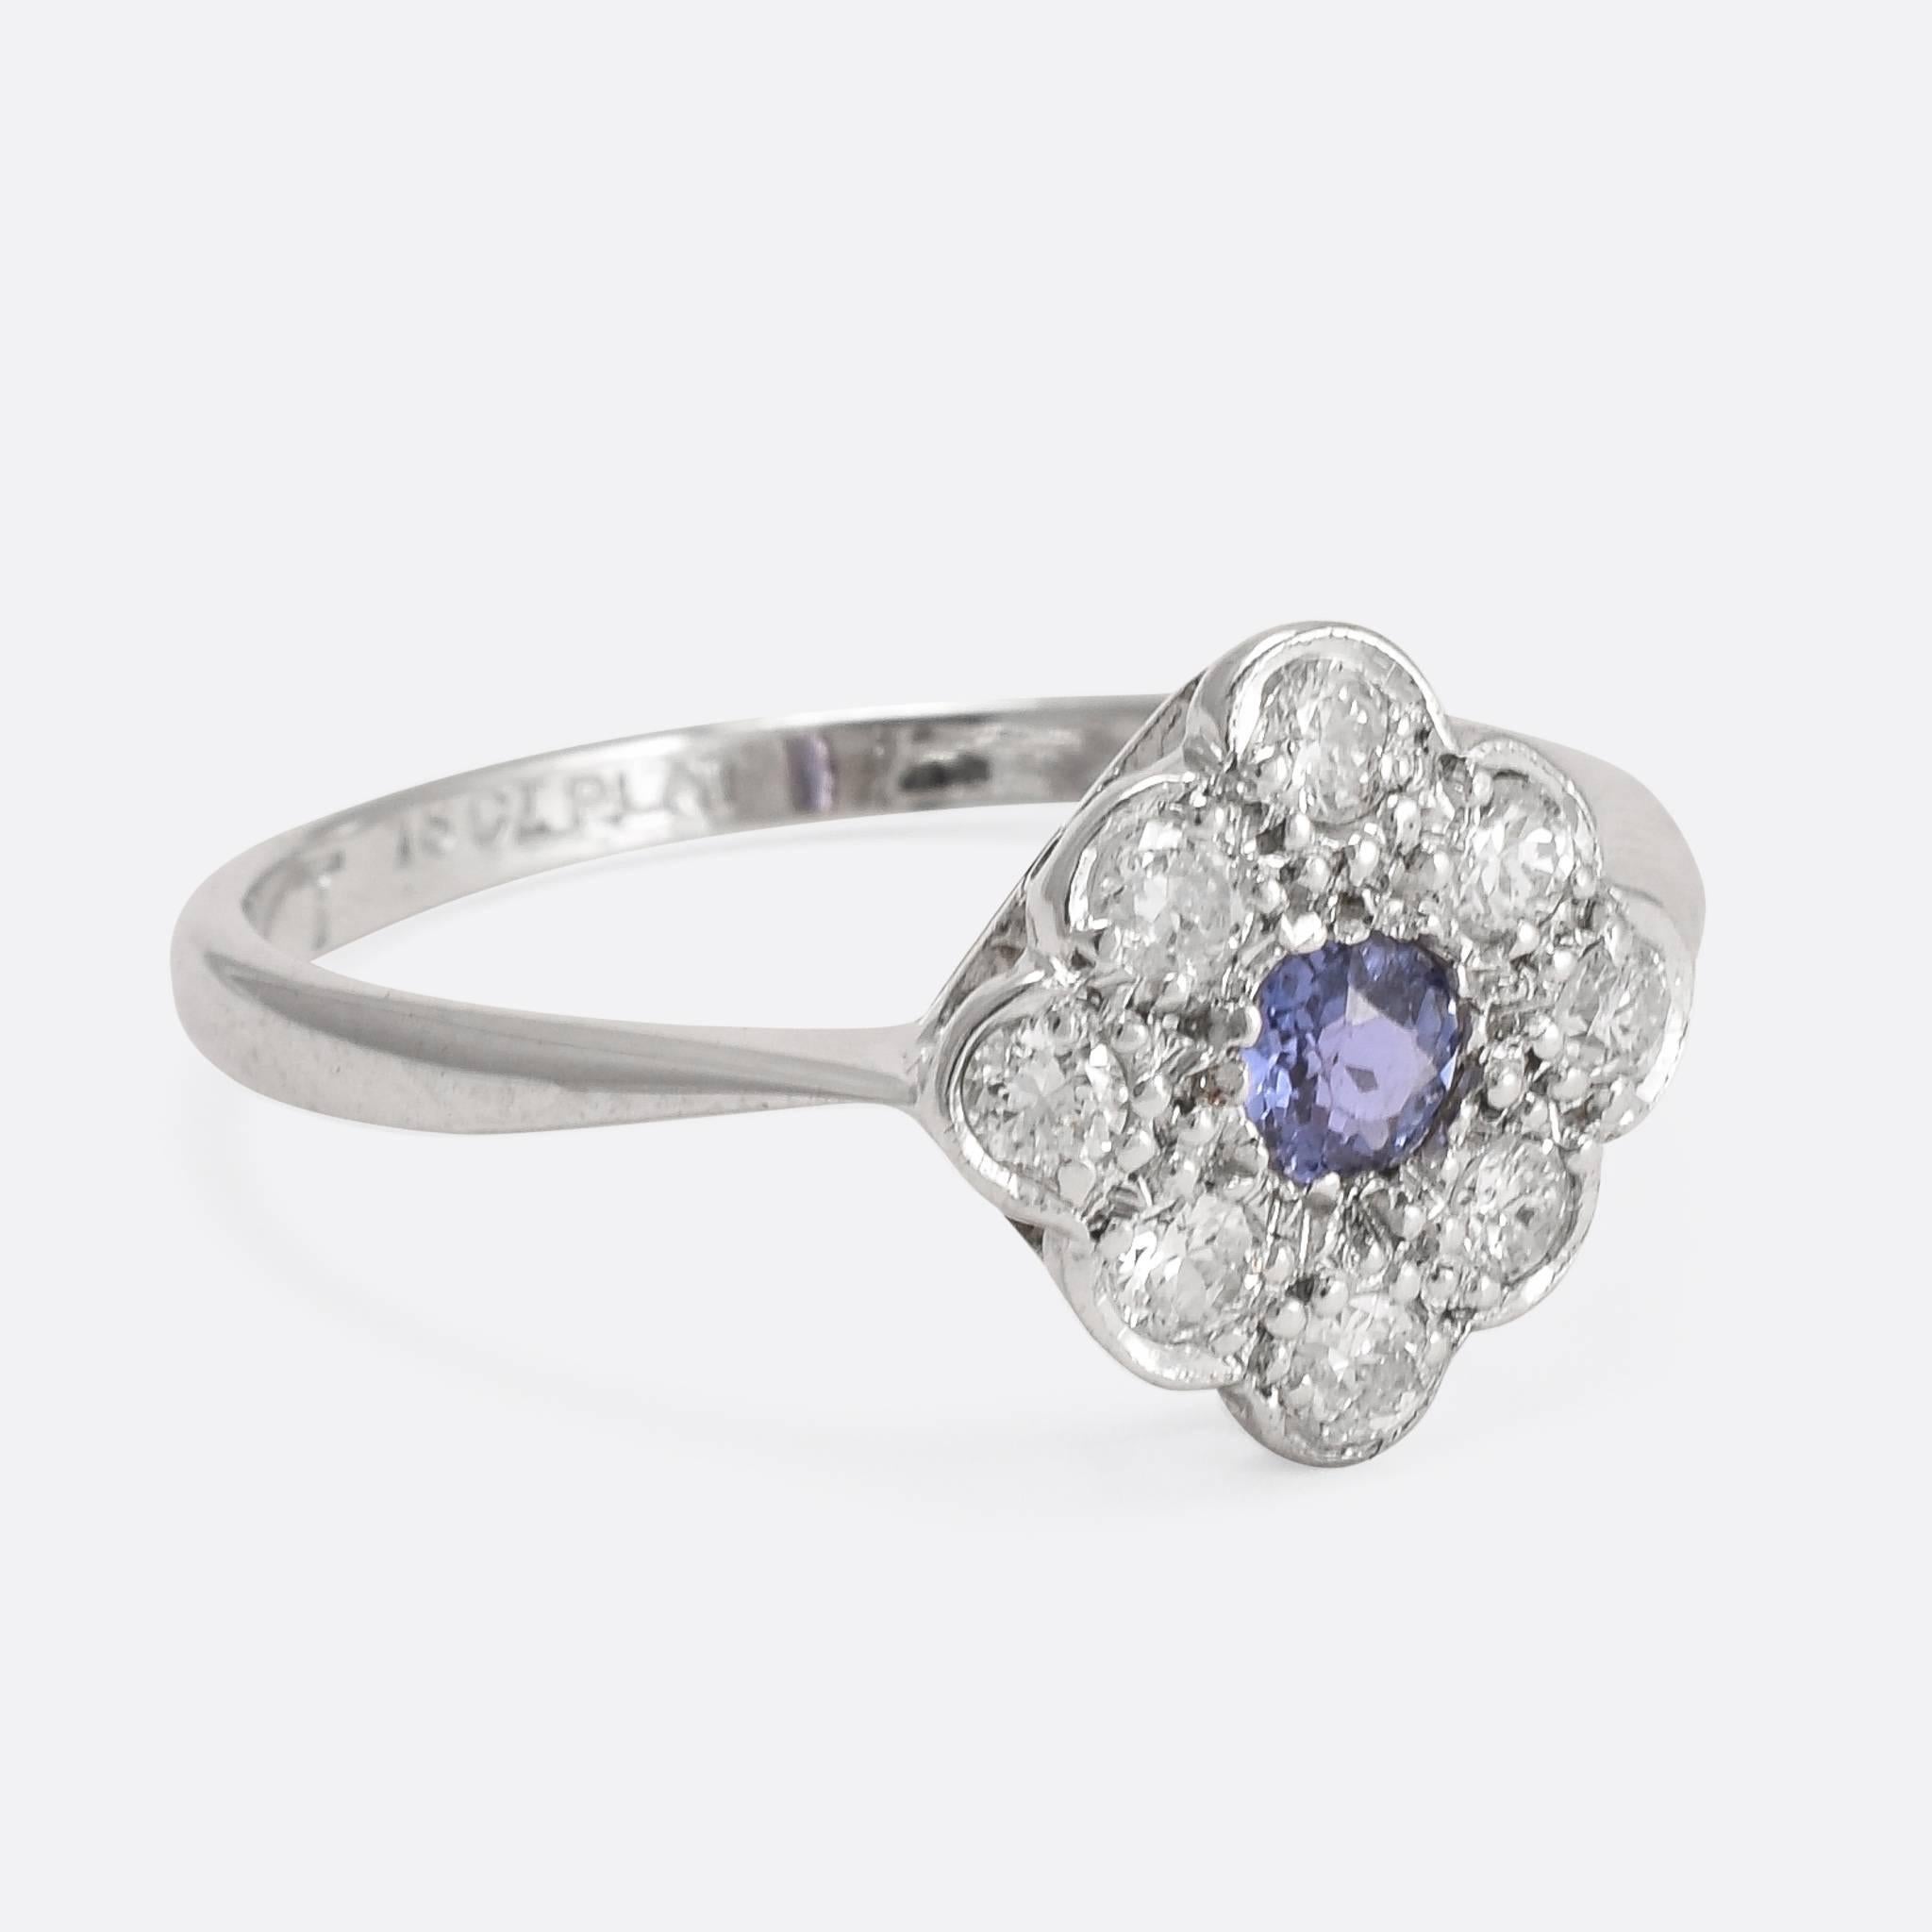 This pretty cluster ring is set with a superb cornflower sapphire, and eight bright brilliant cut diamonds. The simple 18ct white gold band features elegant pinched shoulders, with platinum settings on the head. A dainty ring, full of Art Deco